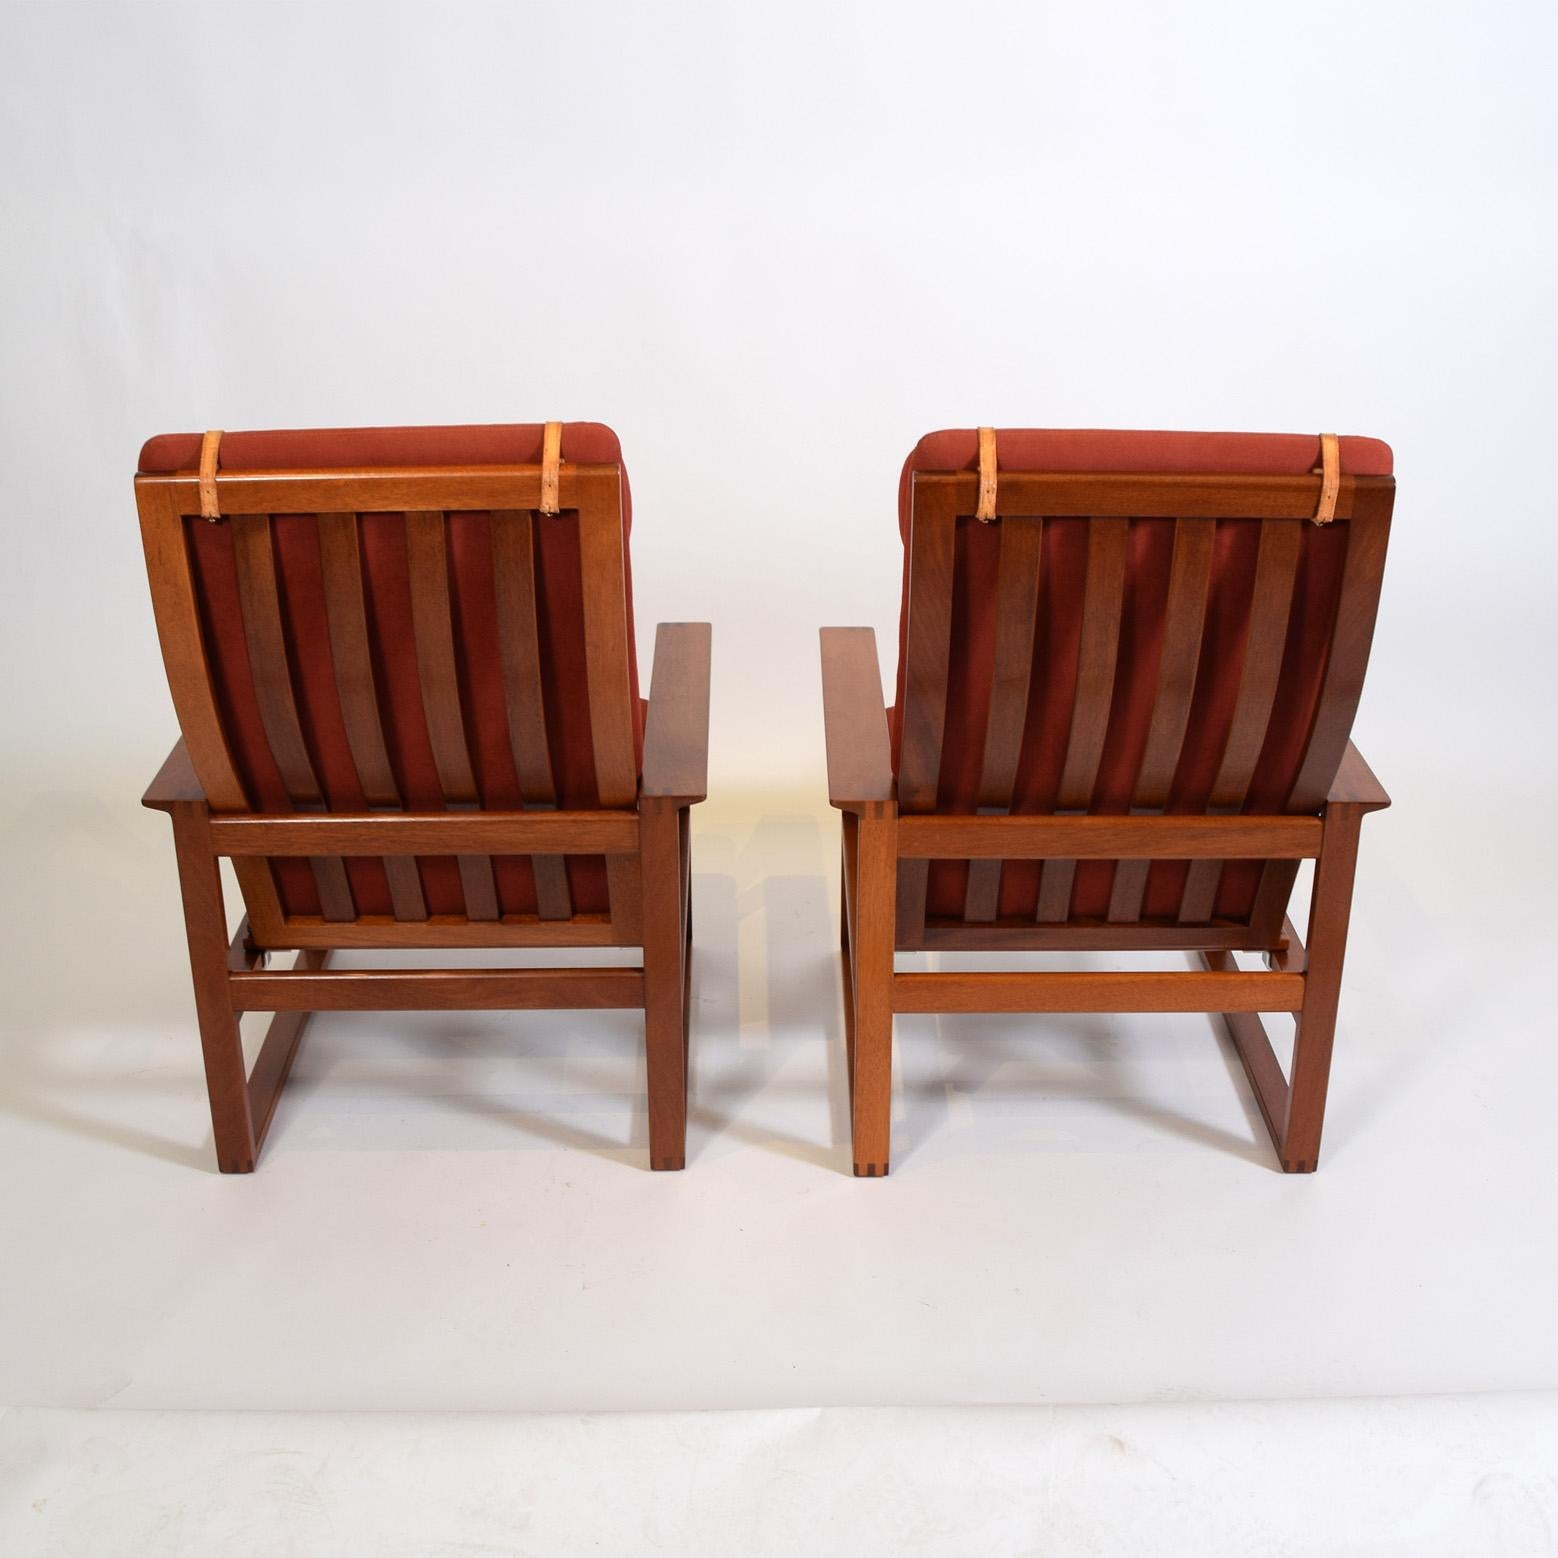 Mahogany Børge Mogensen, Model 2254 Lounge Chairs, 1956 For Sale